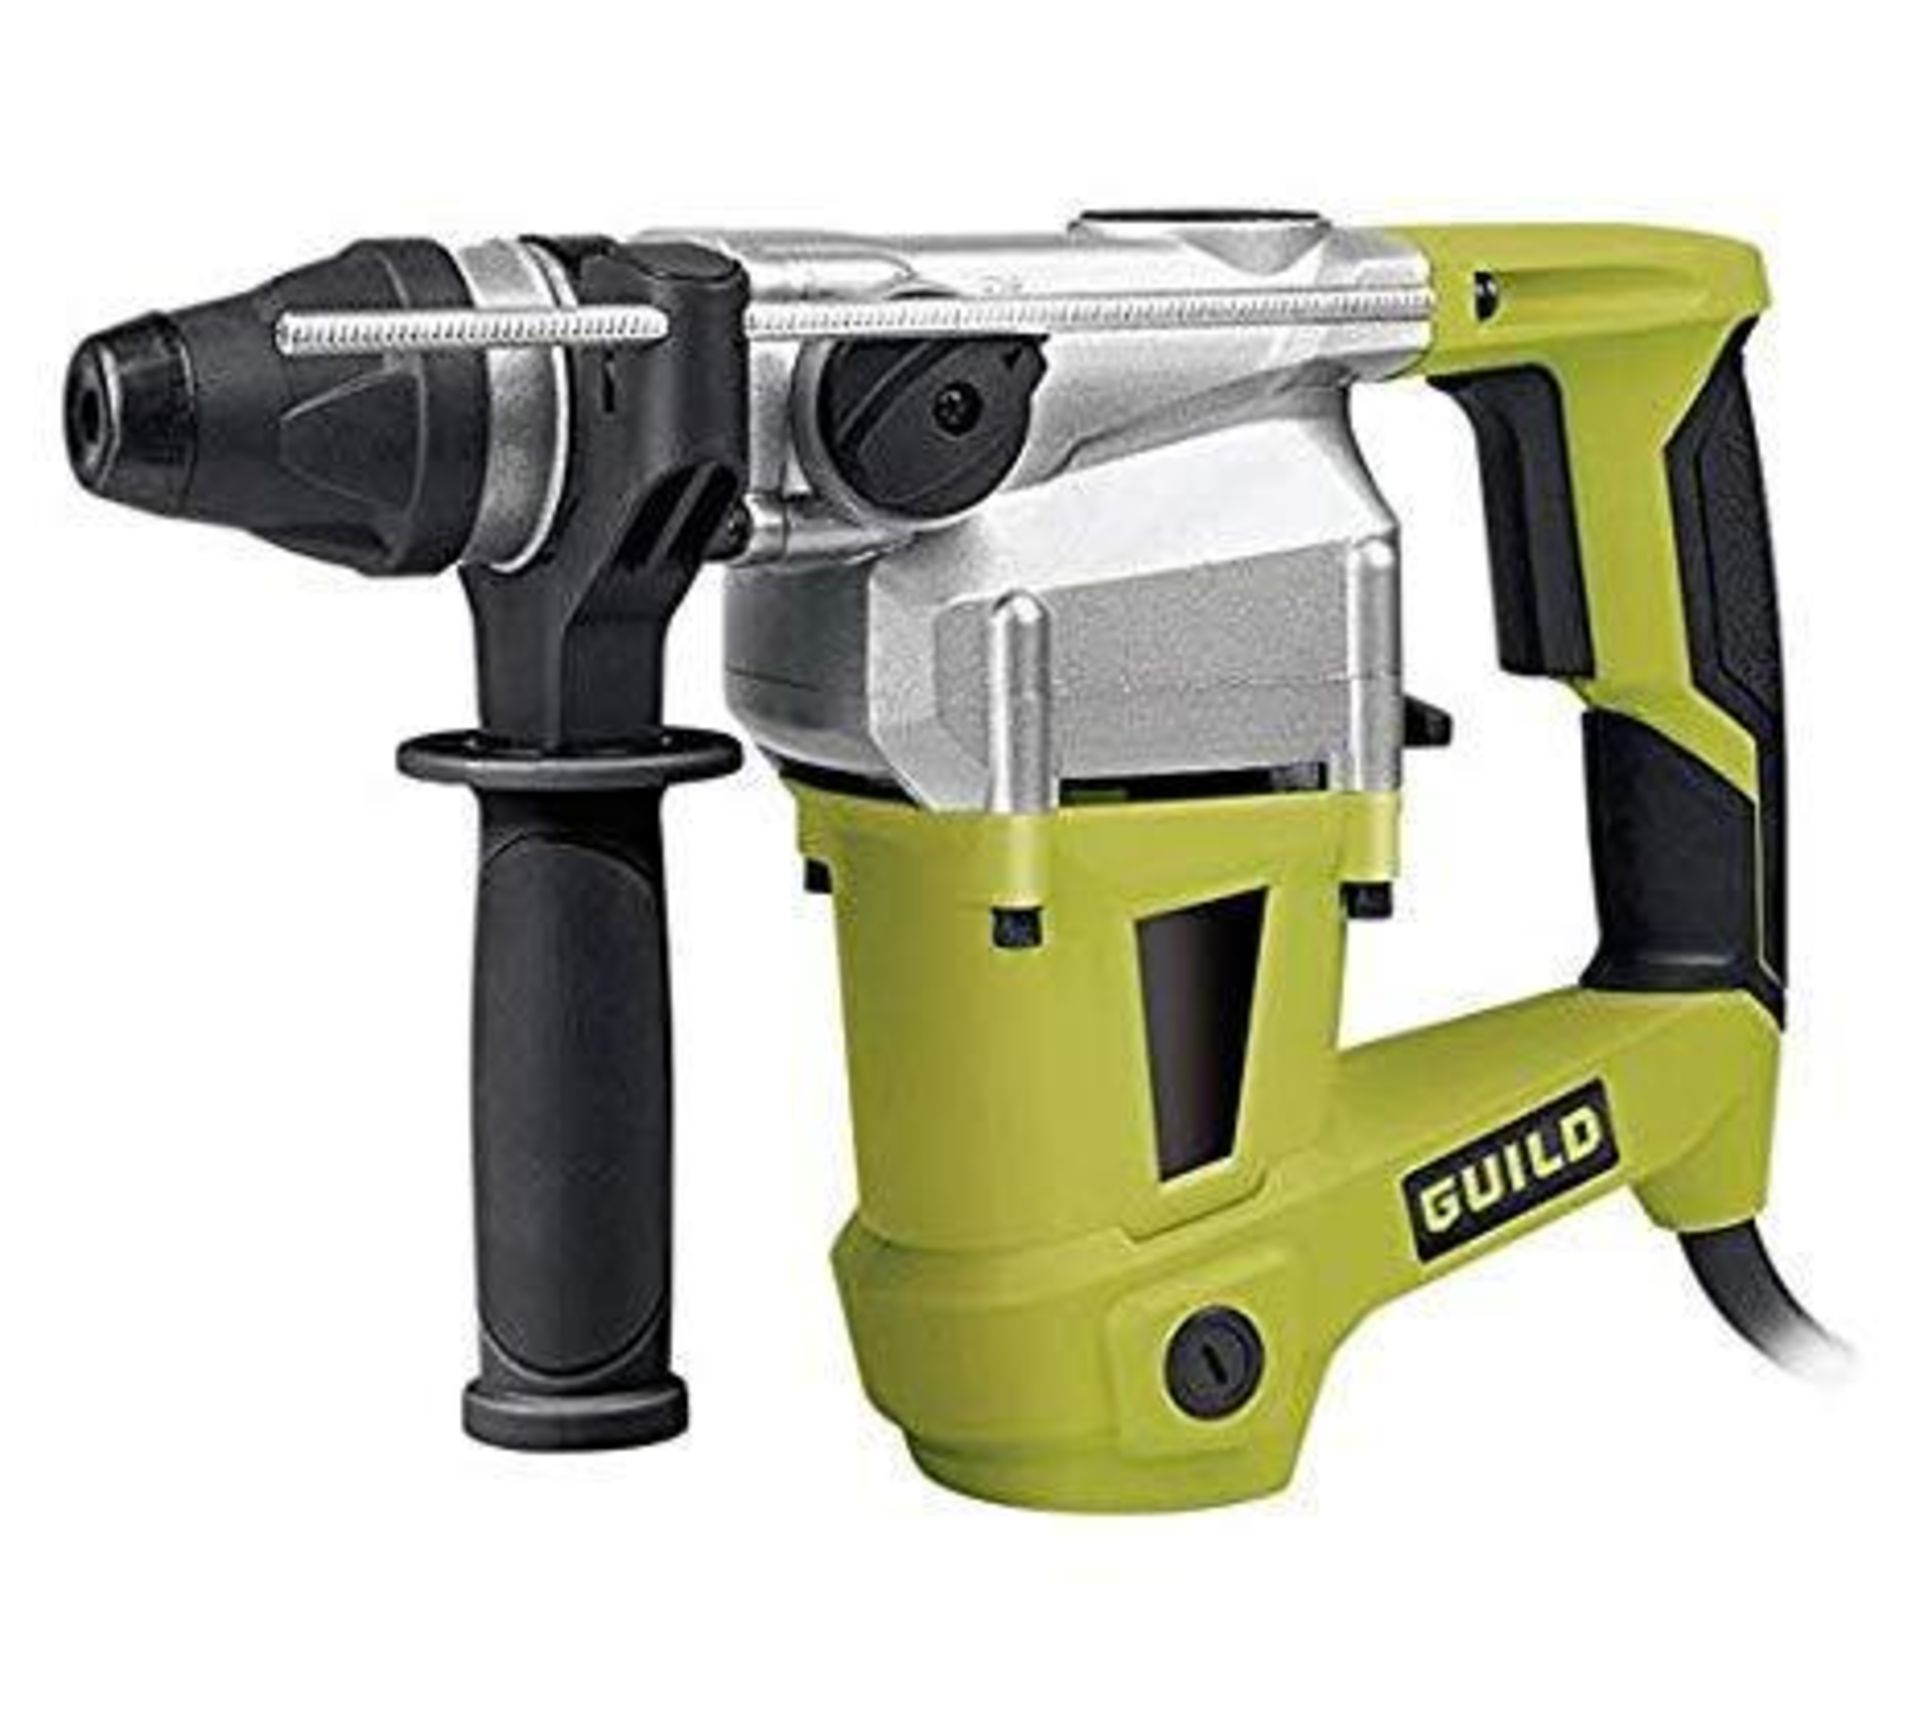 Guild 1000W SDS Rotary Hammer £50.00 RRP